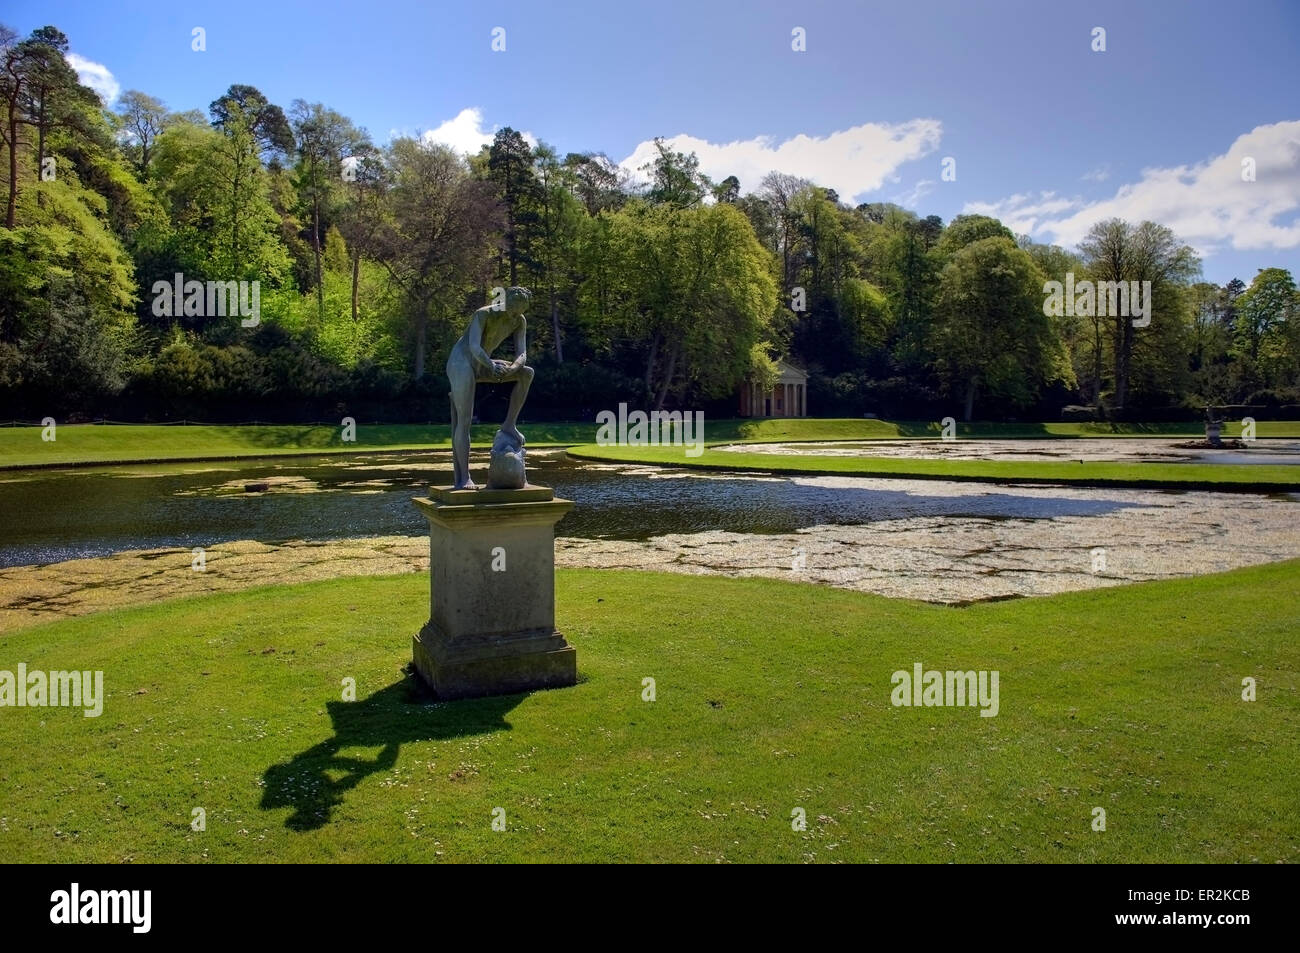 Statue and Temple of Piety, Studley Royal landscape gardens, near Ripon, North Yorkshire, England, UK Europe Stock Photo